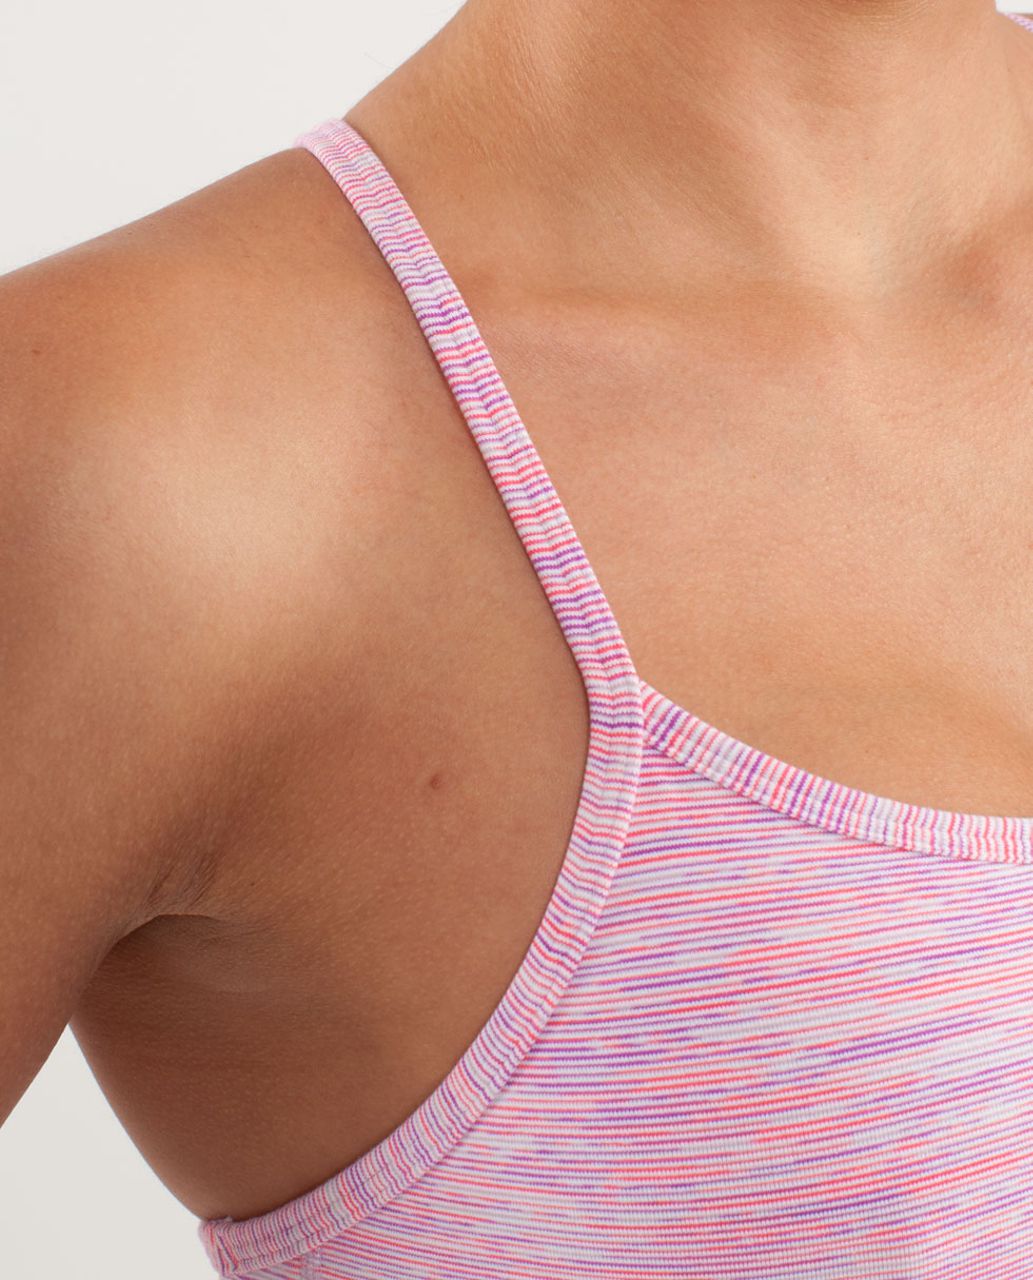 Lululemon Power Y Tank - Wee Are From Space White April Multi